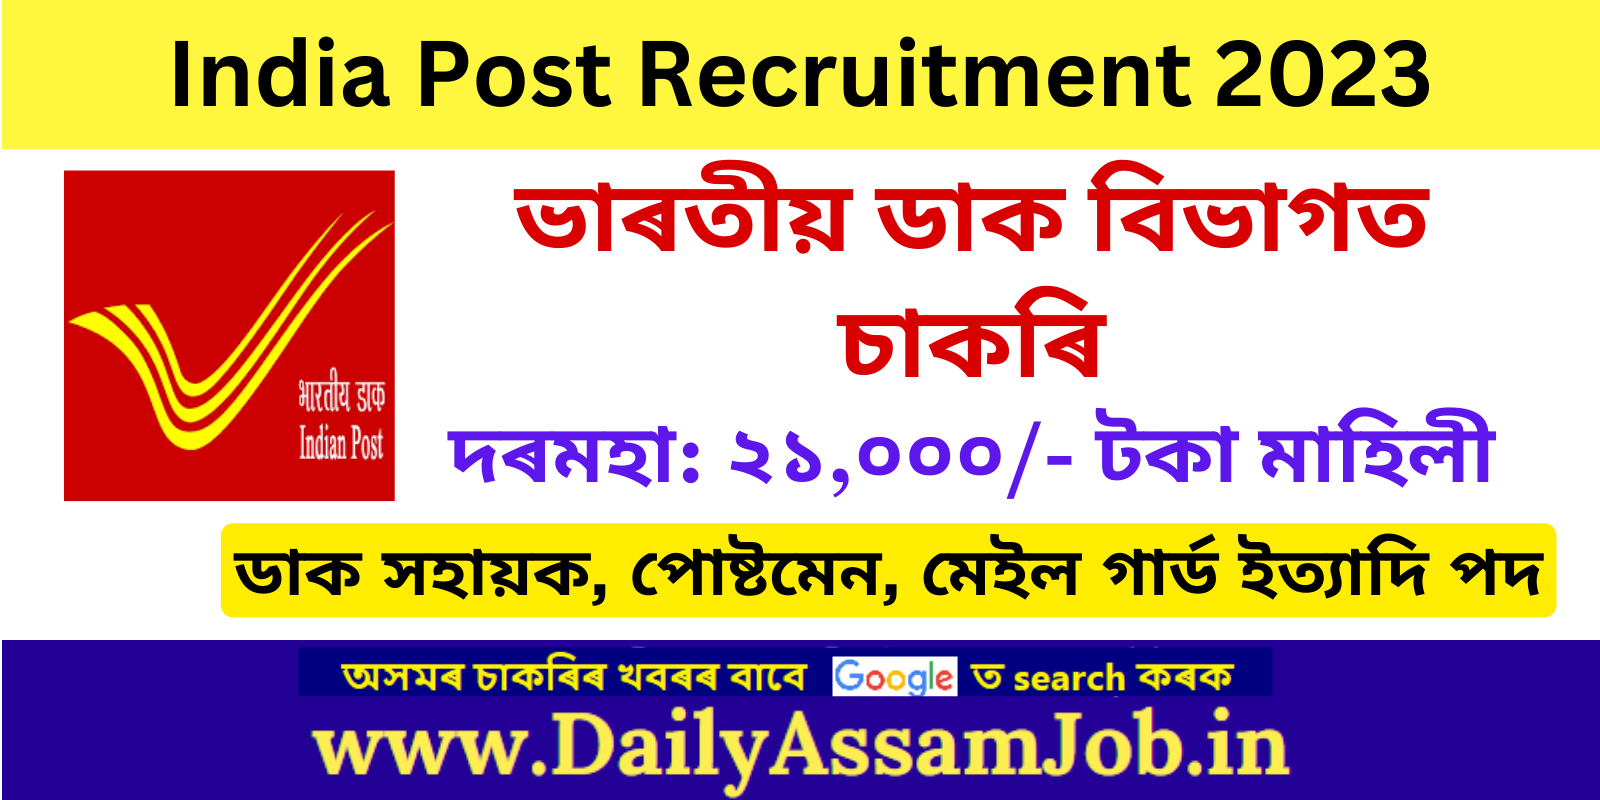 Assam Career :: India Post Recruitment 2023 for 1899 PA, SA, MTS & Other Vacancies